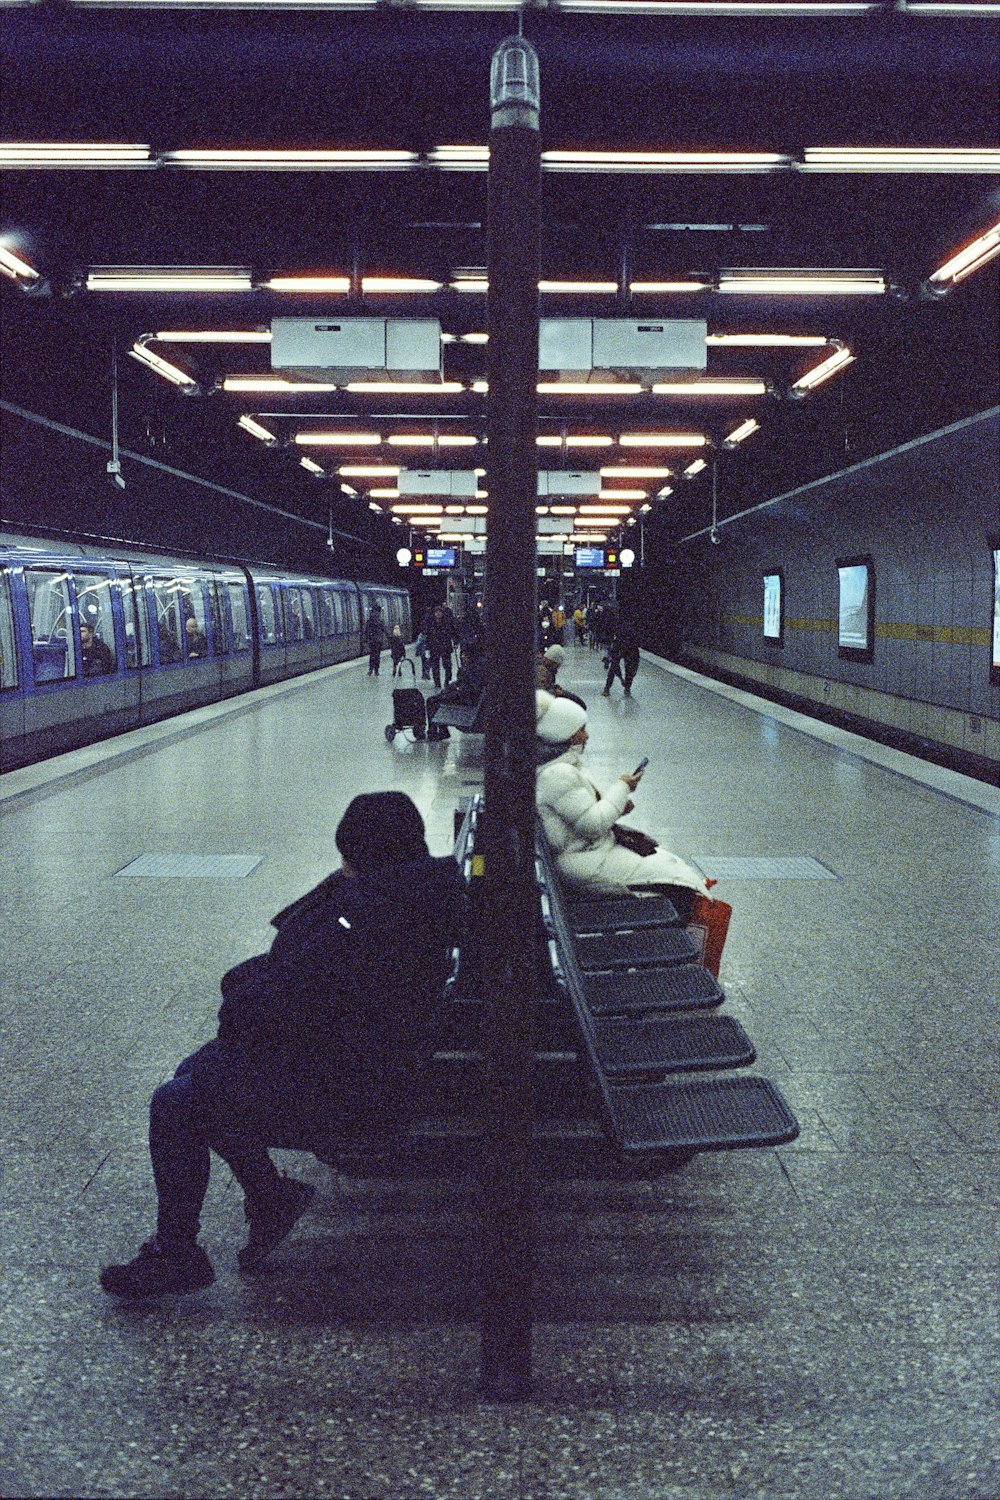 a person sitting on a bench in a train station